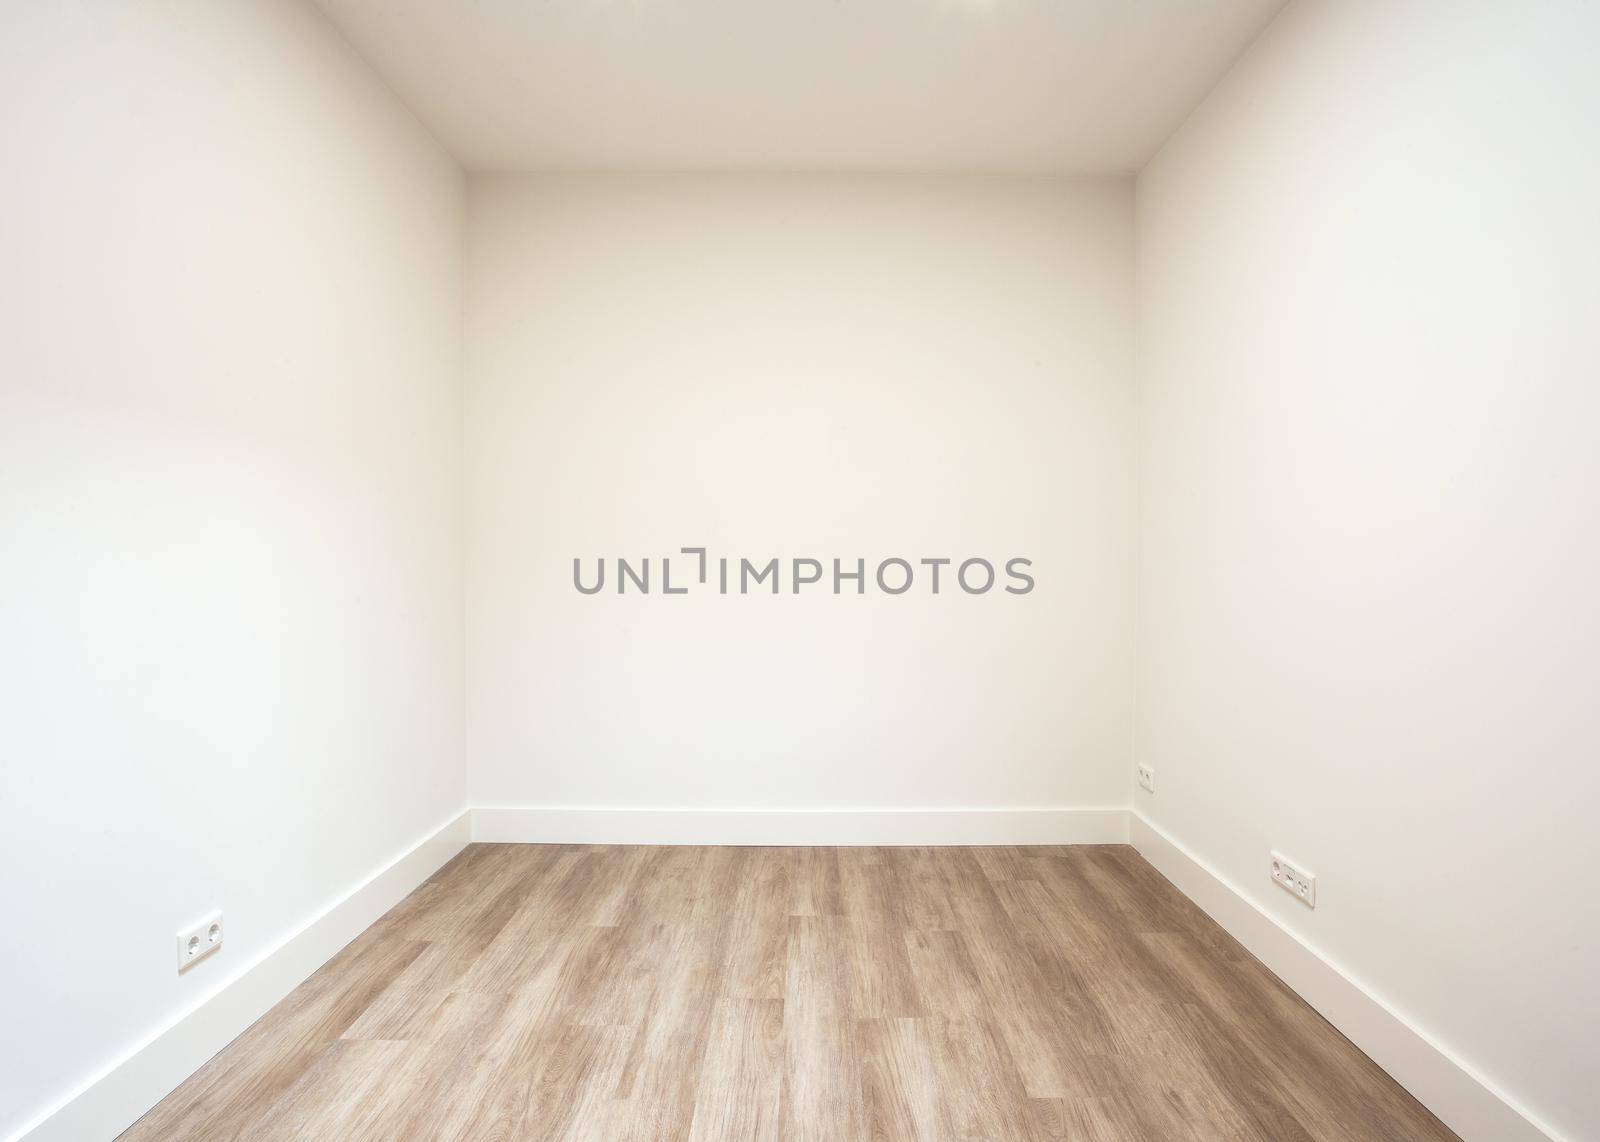 new apartment or house, empty white room with hardwood floor modern design, copy space, architecture,interior,real estate concept home